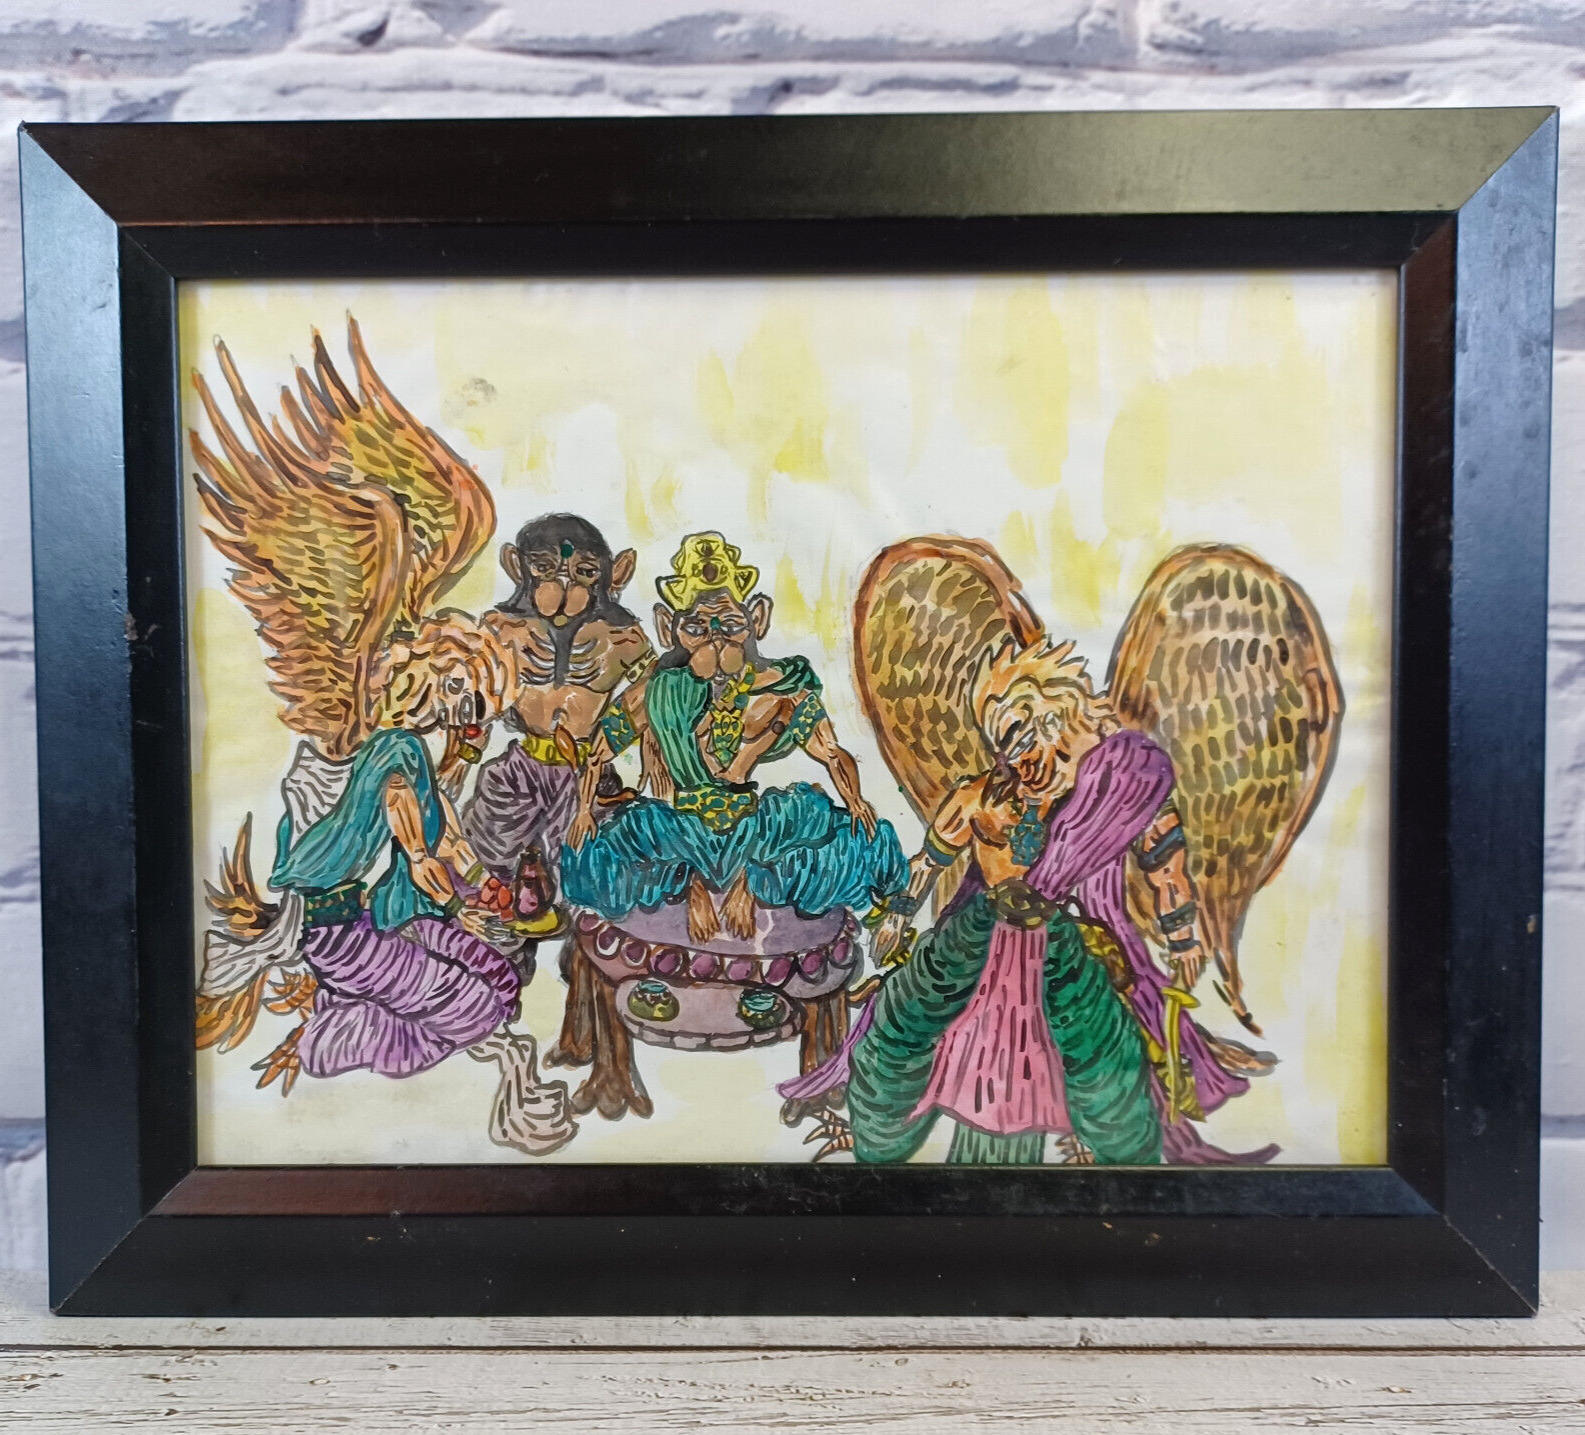 Bird & Monkey Lords Anthropomorphic Water Color Painting Framed Unknown Artist